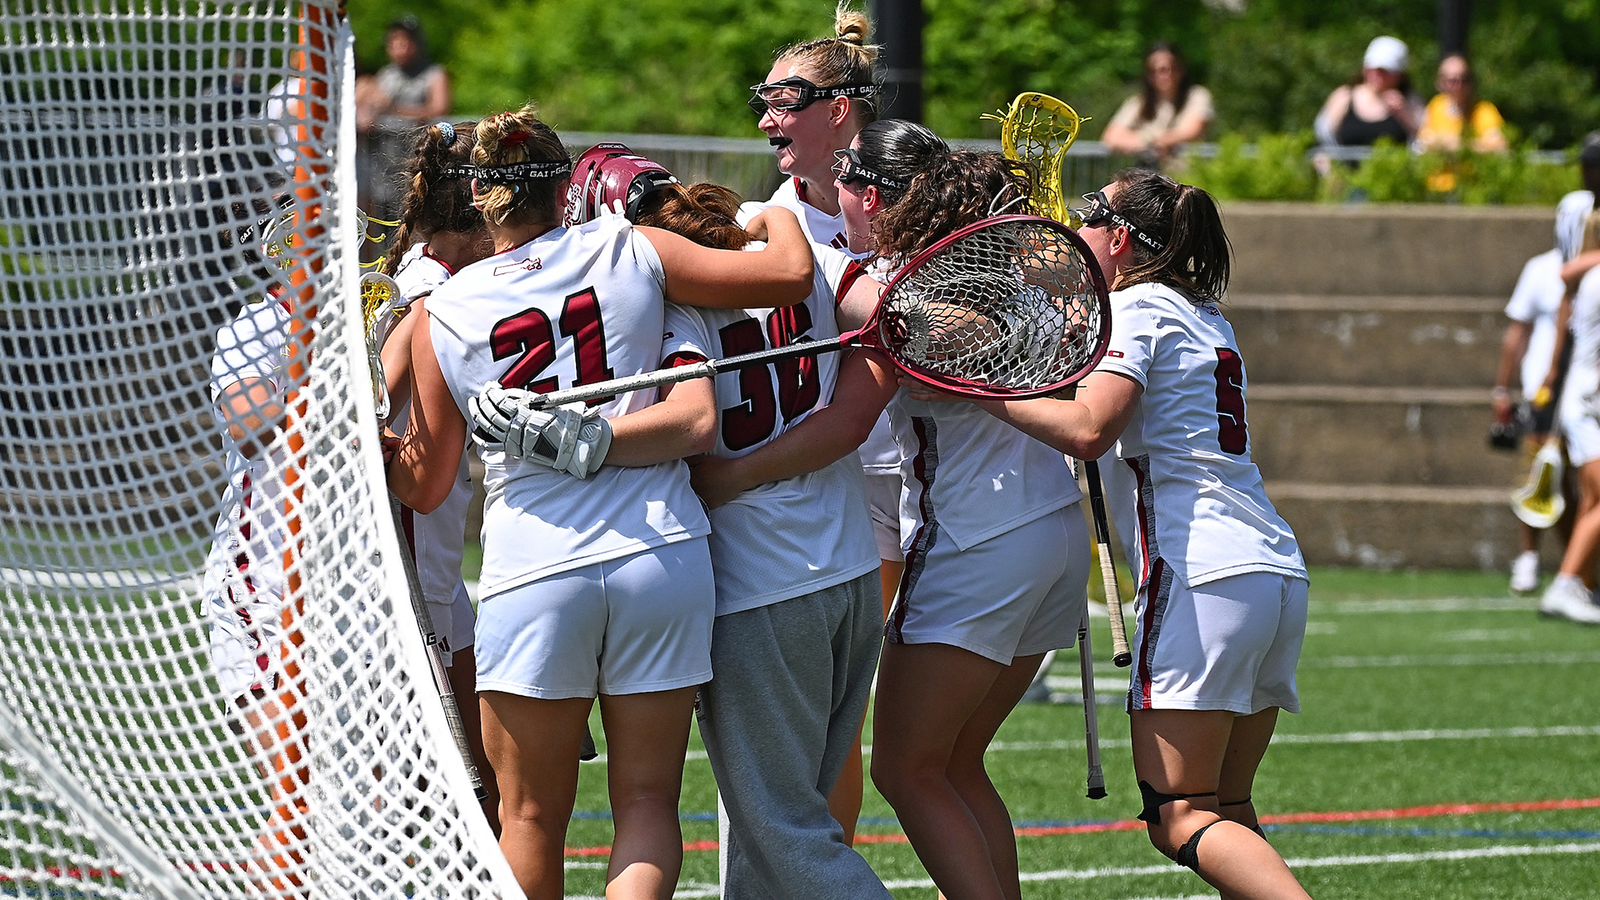 Women's Lacrosse takes on Richmond in Sunday's Atlantic 10 Championship Game